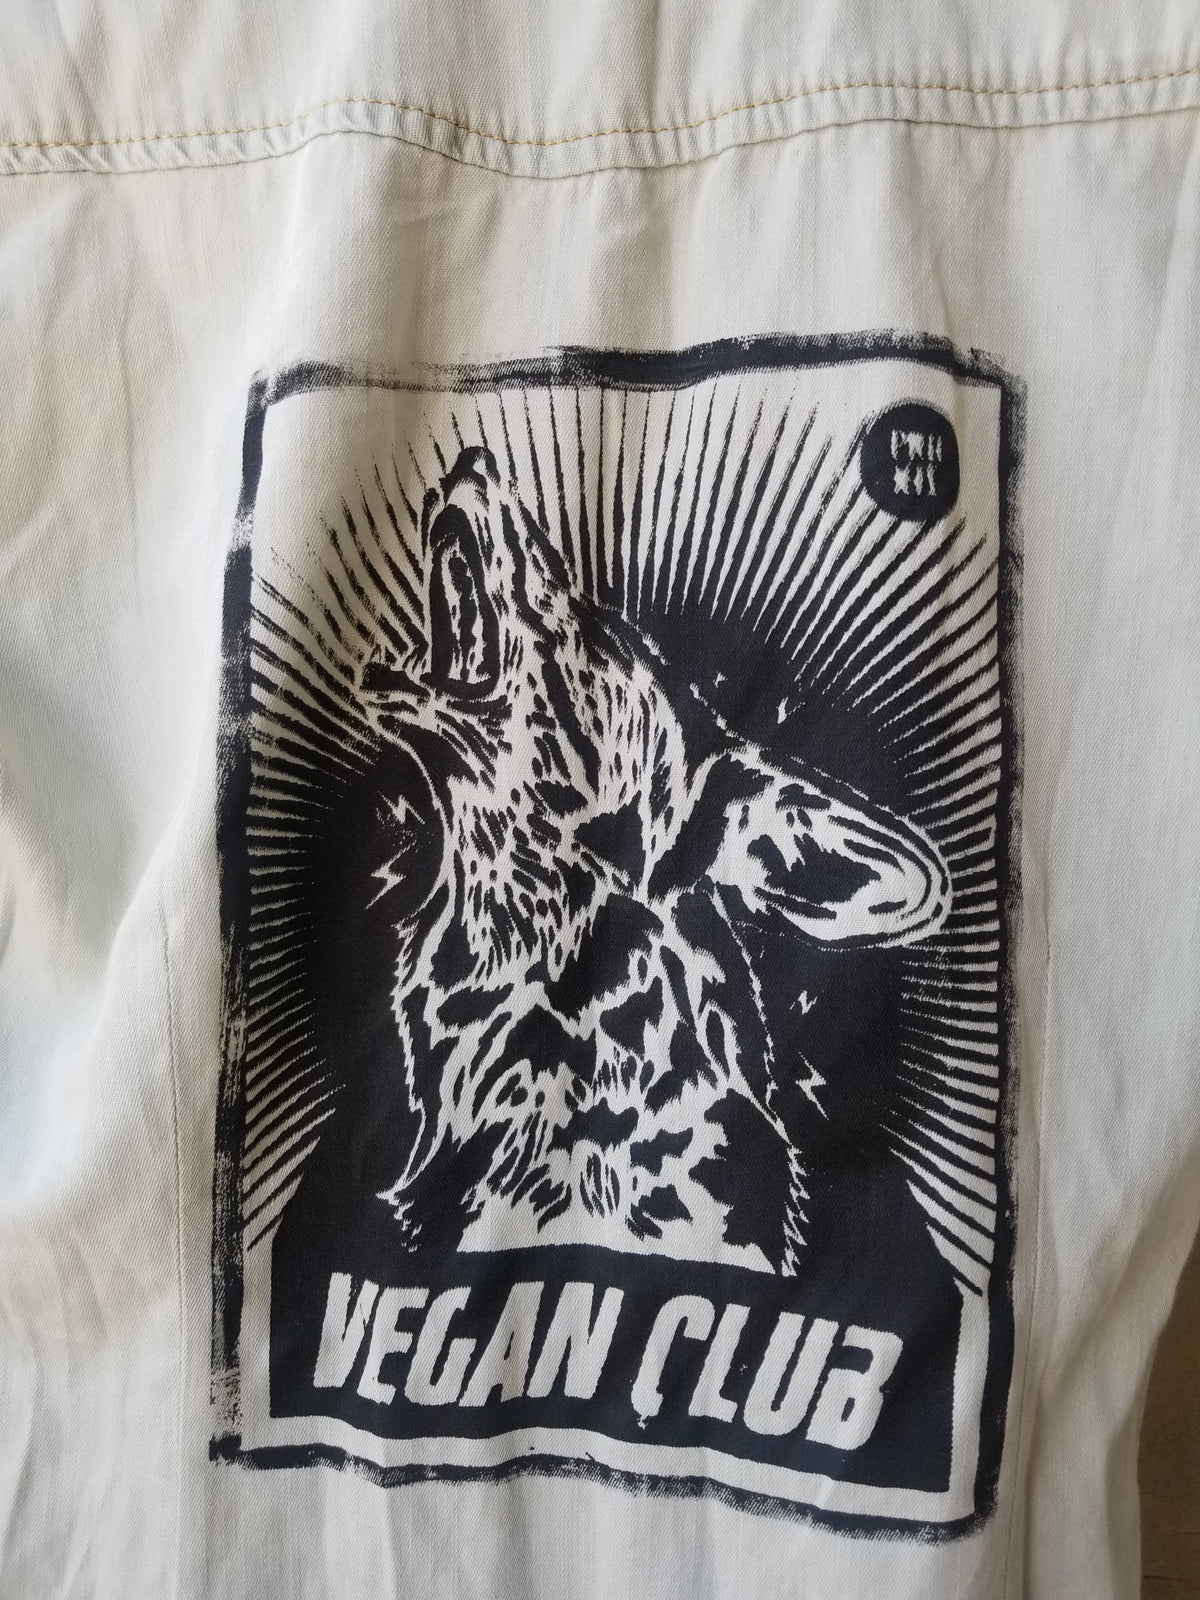 SOLD - One of a Kind Upcycled Vegan Club shirt with crying wolf, art by Praxis